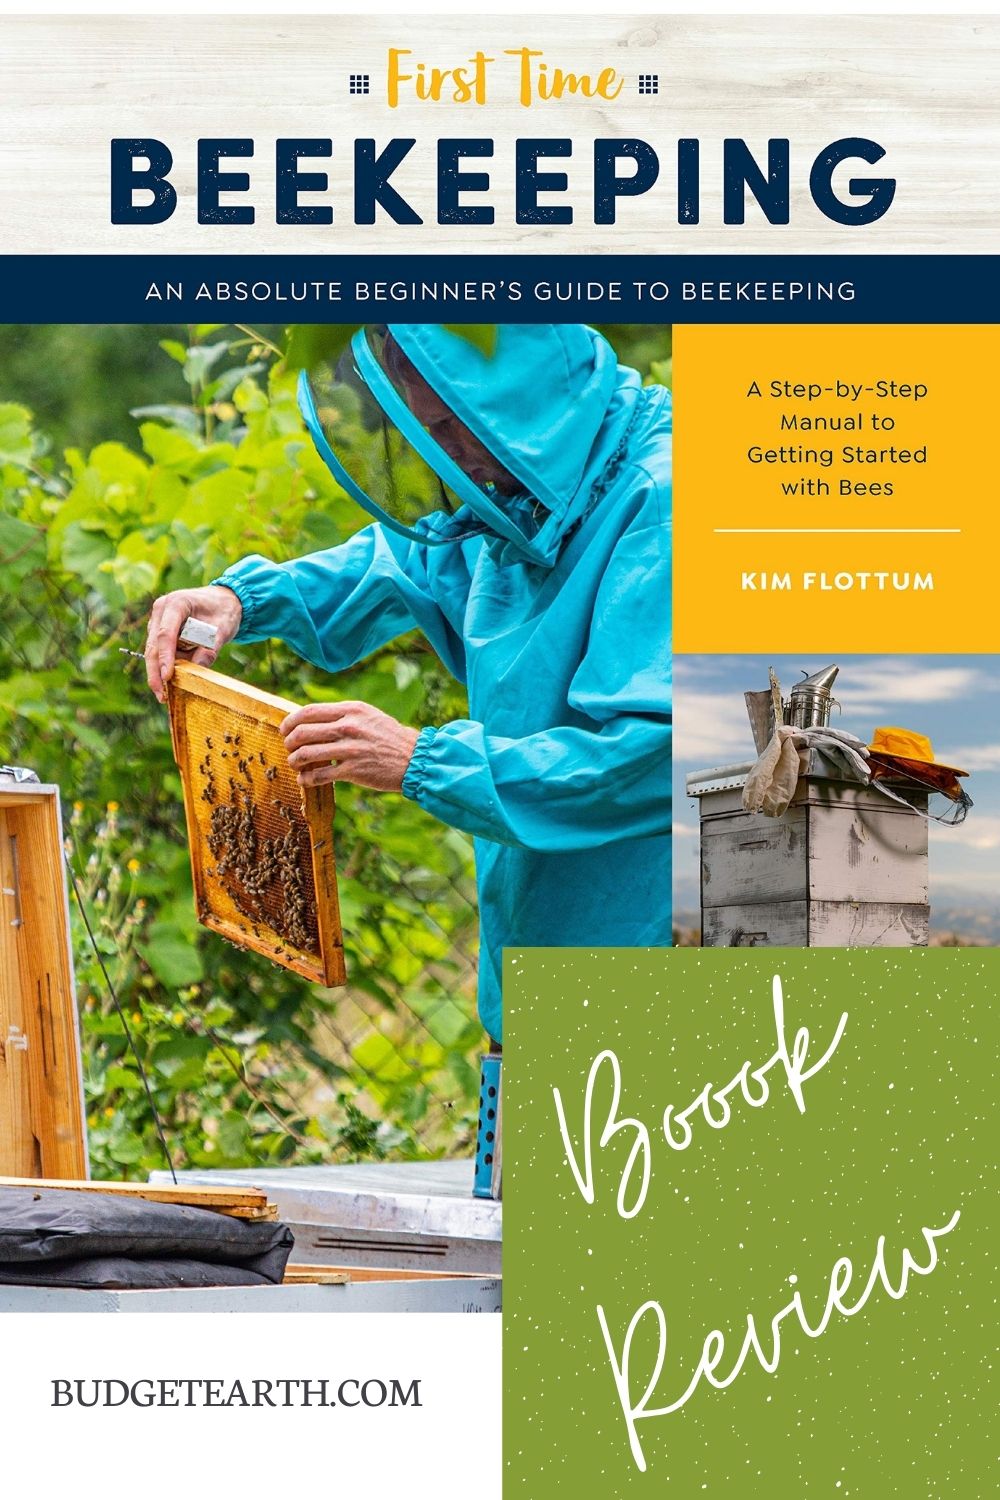 First Time Beekeeping book cover